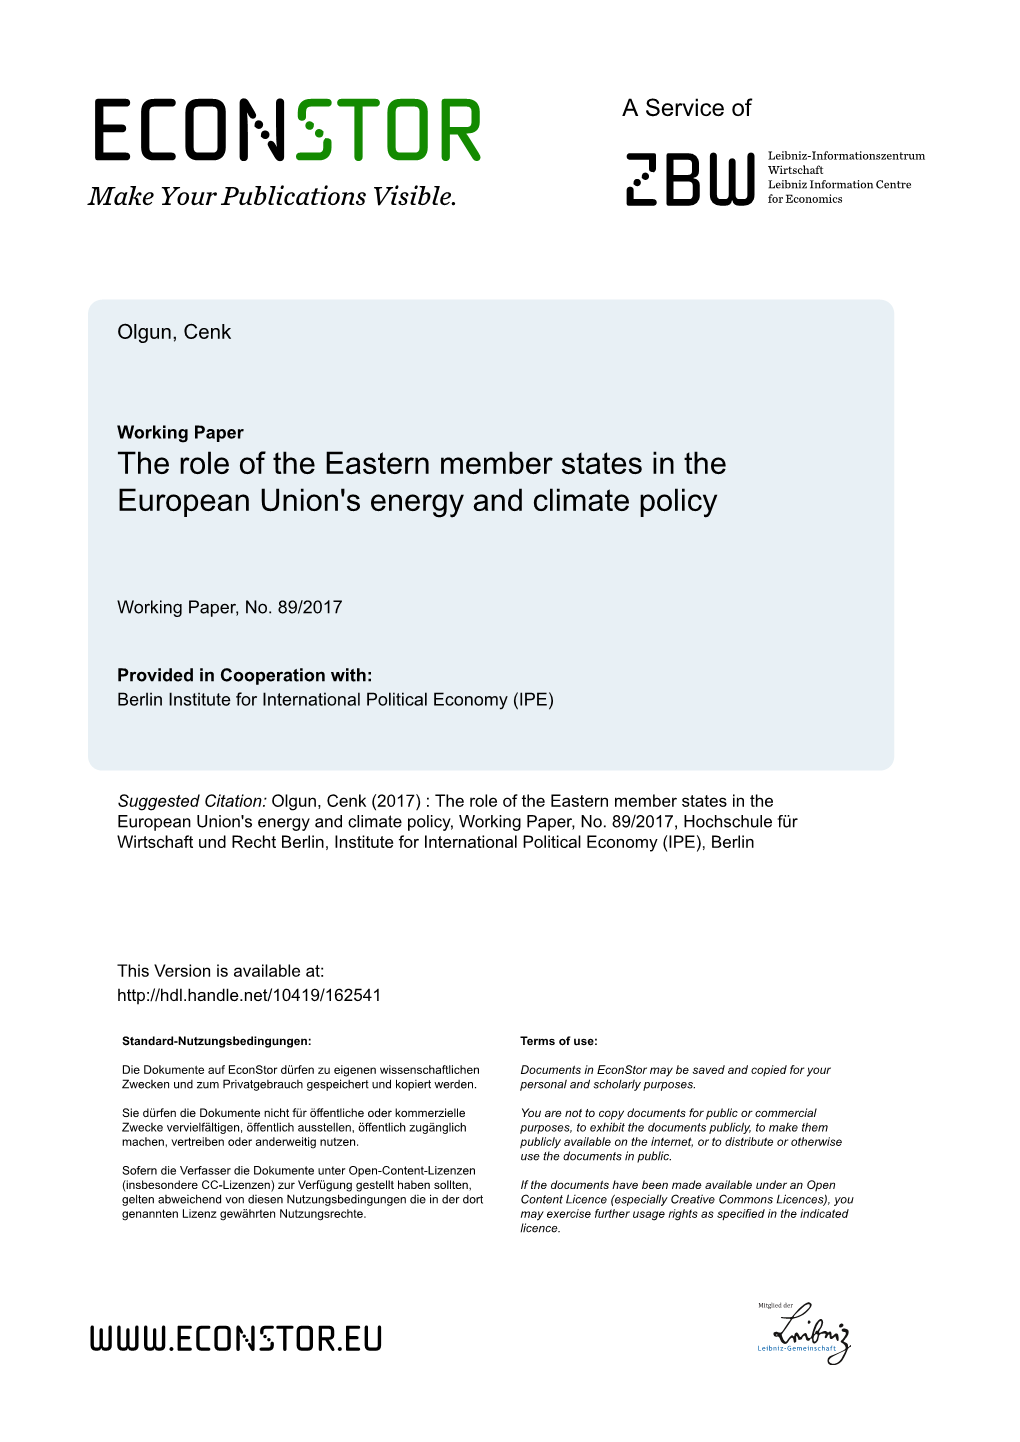 The Role of the Eastern Member States in the European Union's Energy and Climate Policy